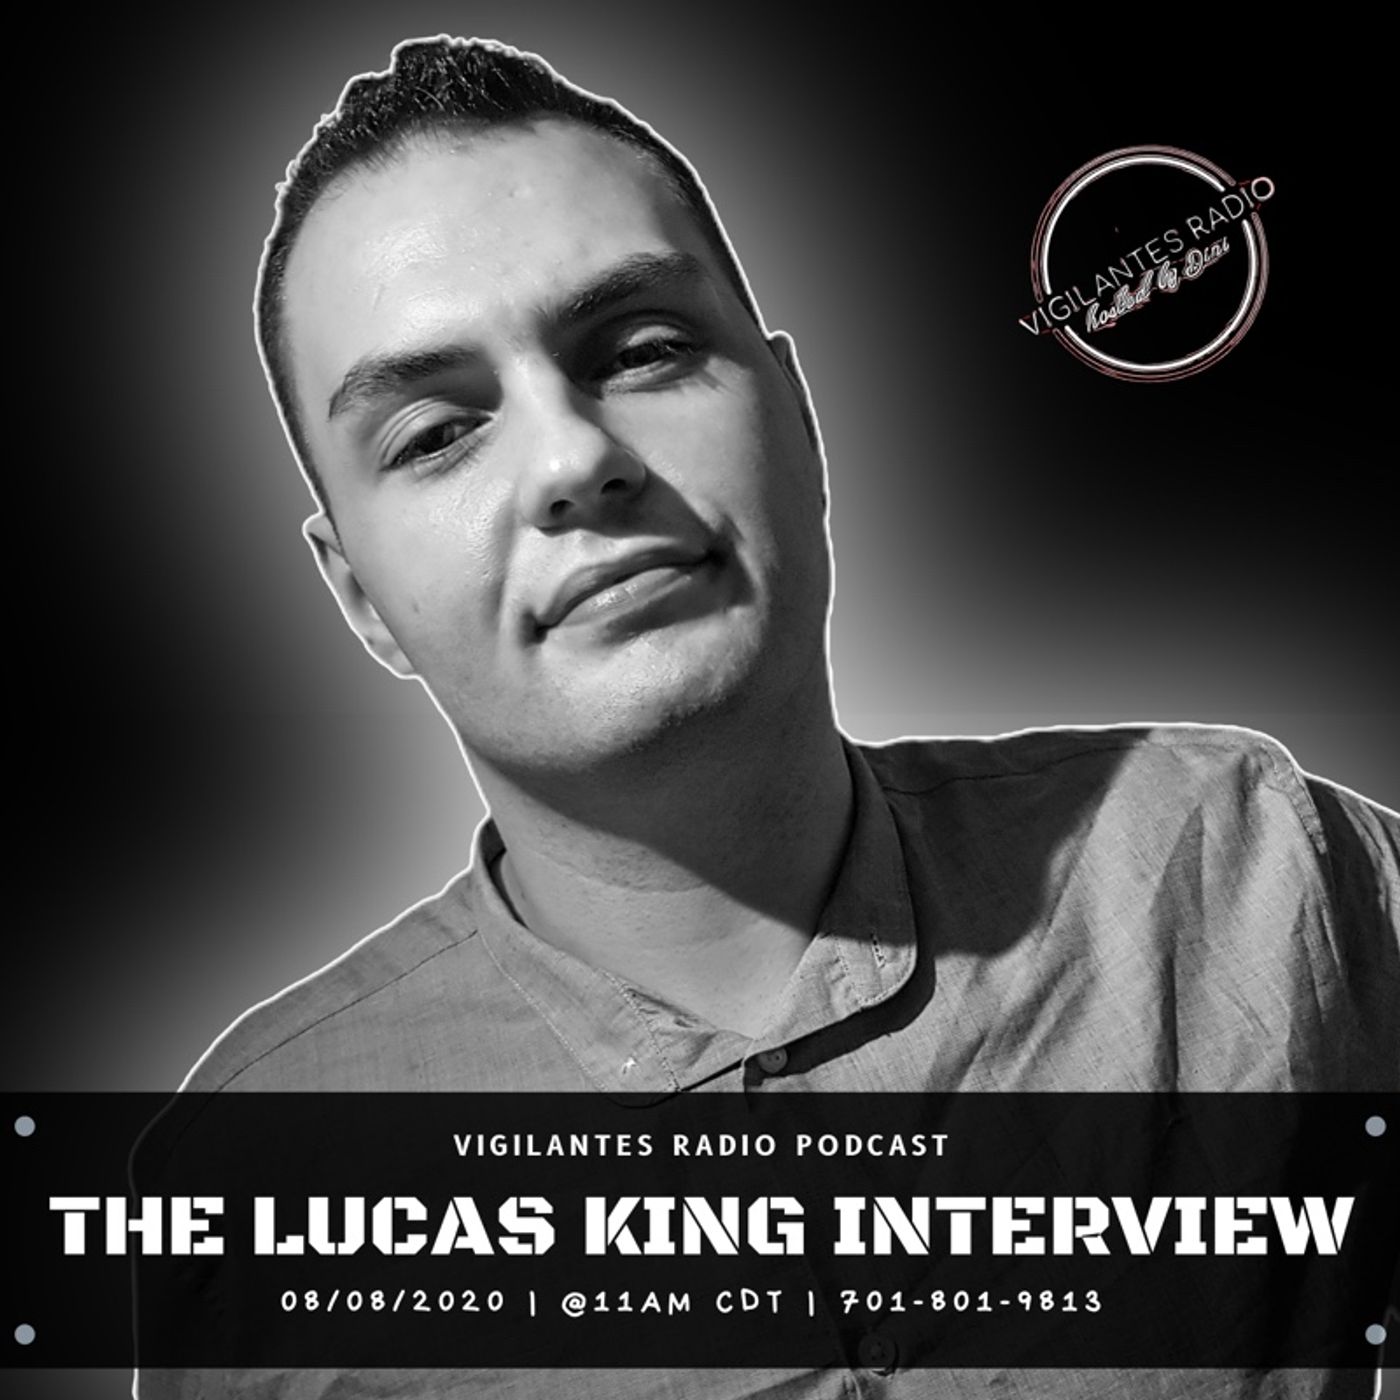 The Lucas King Interview. Image